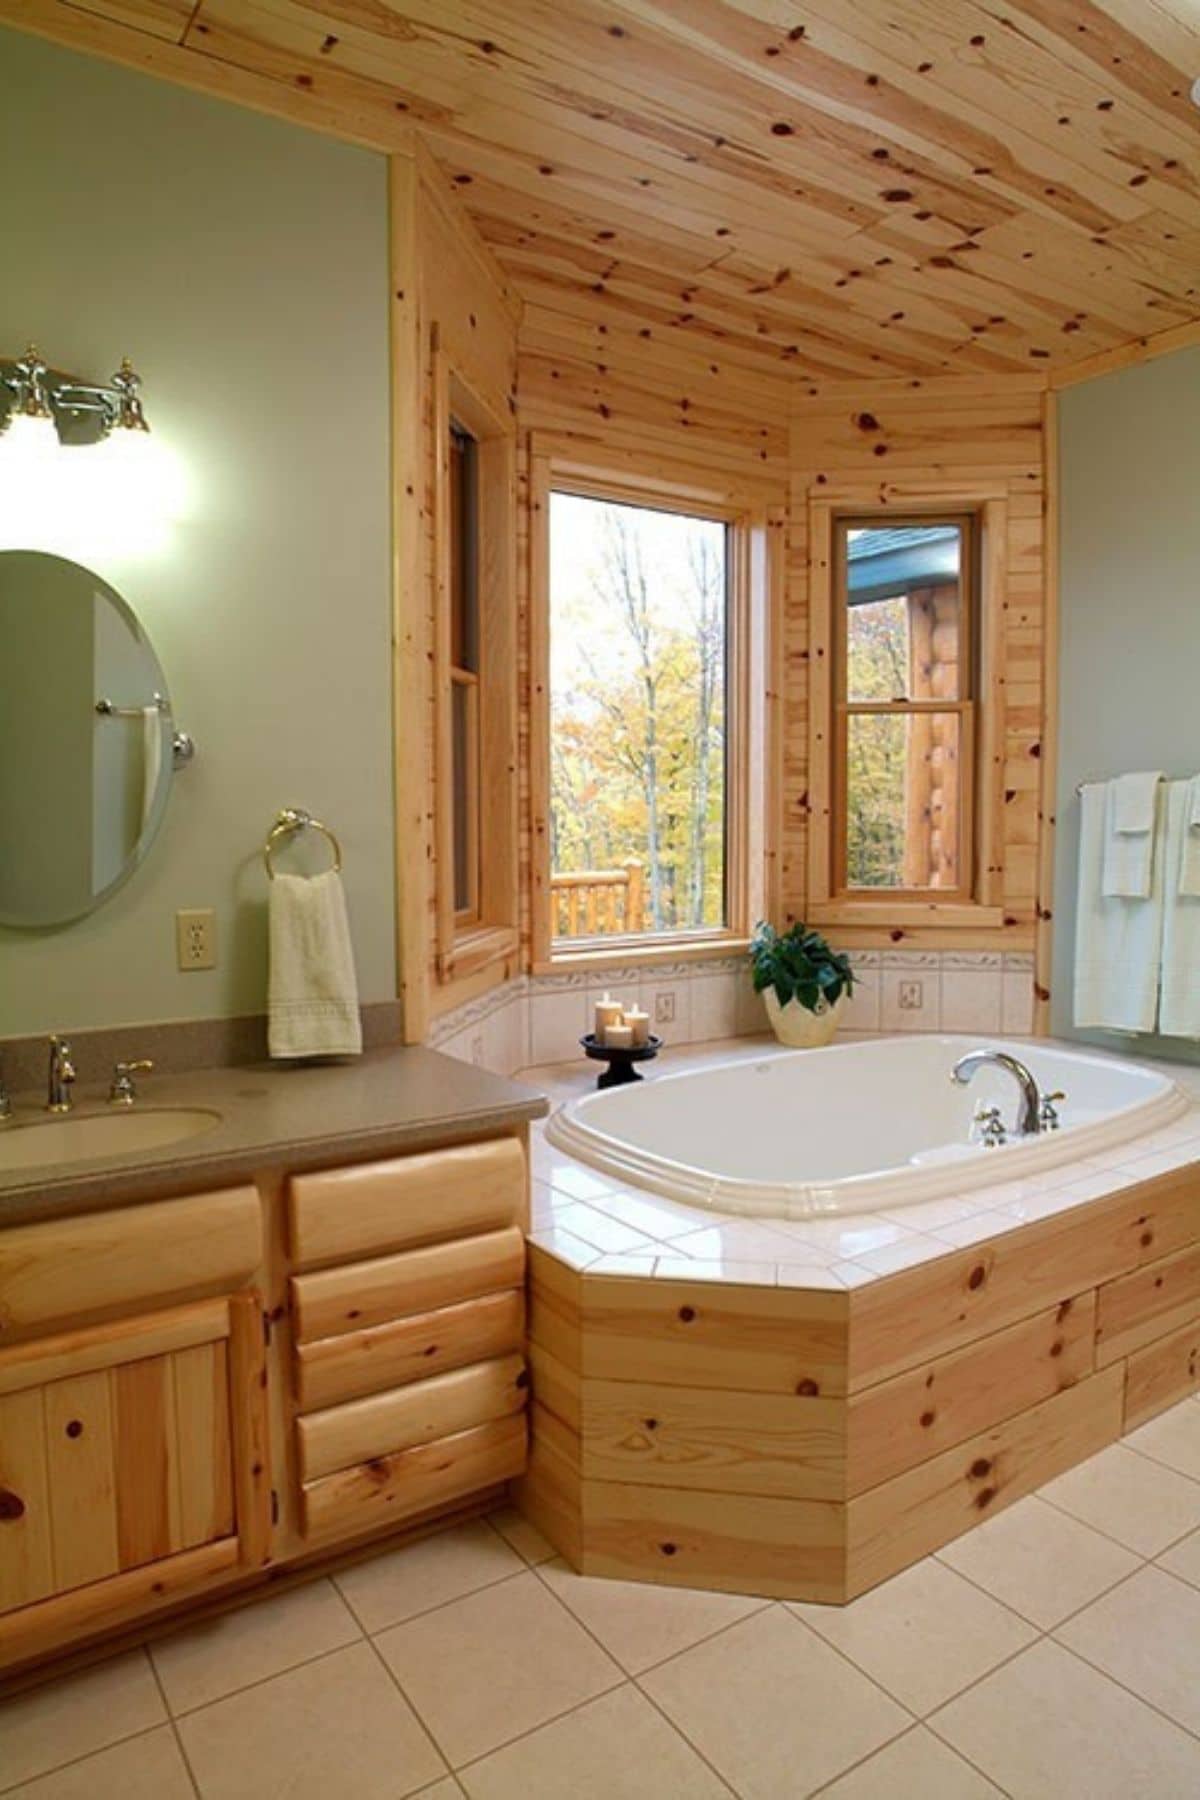 bathroom with light green walls and jacuzzi tub surrounded by pine paneling